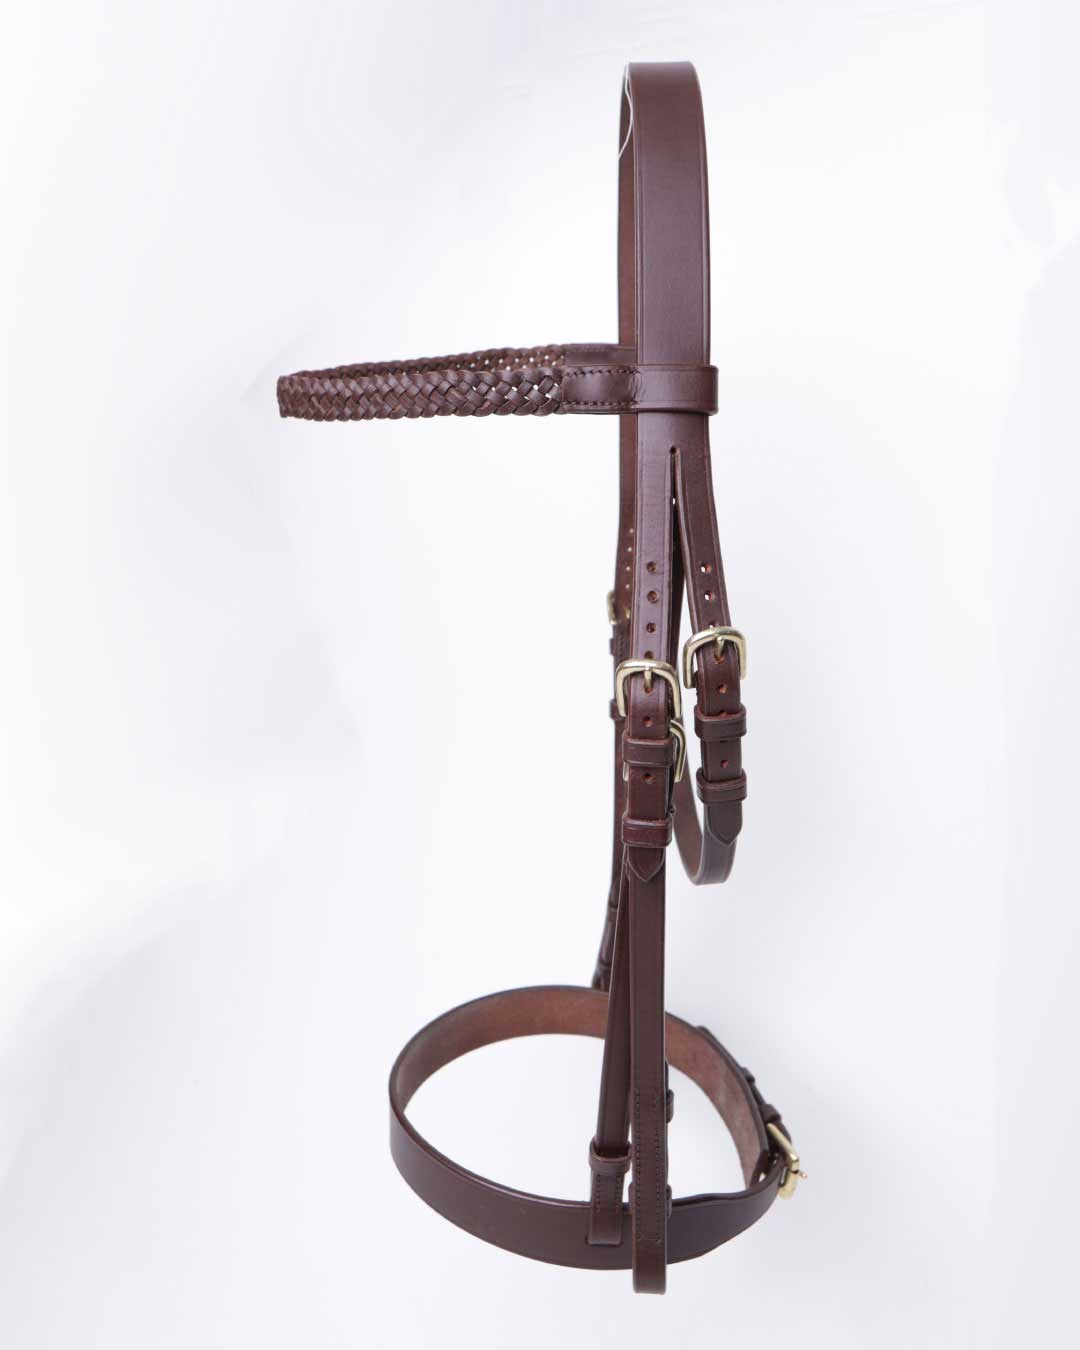 Leather hunt cavesson bridle including reins